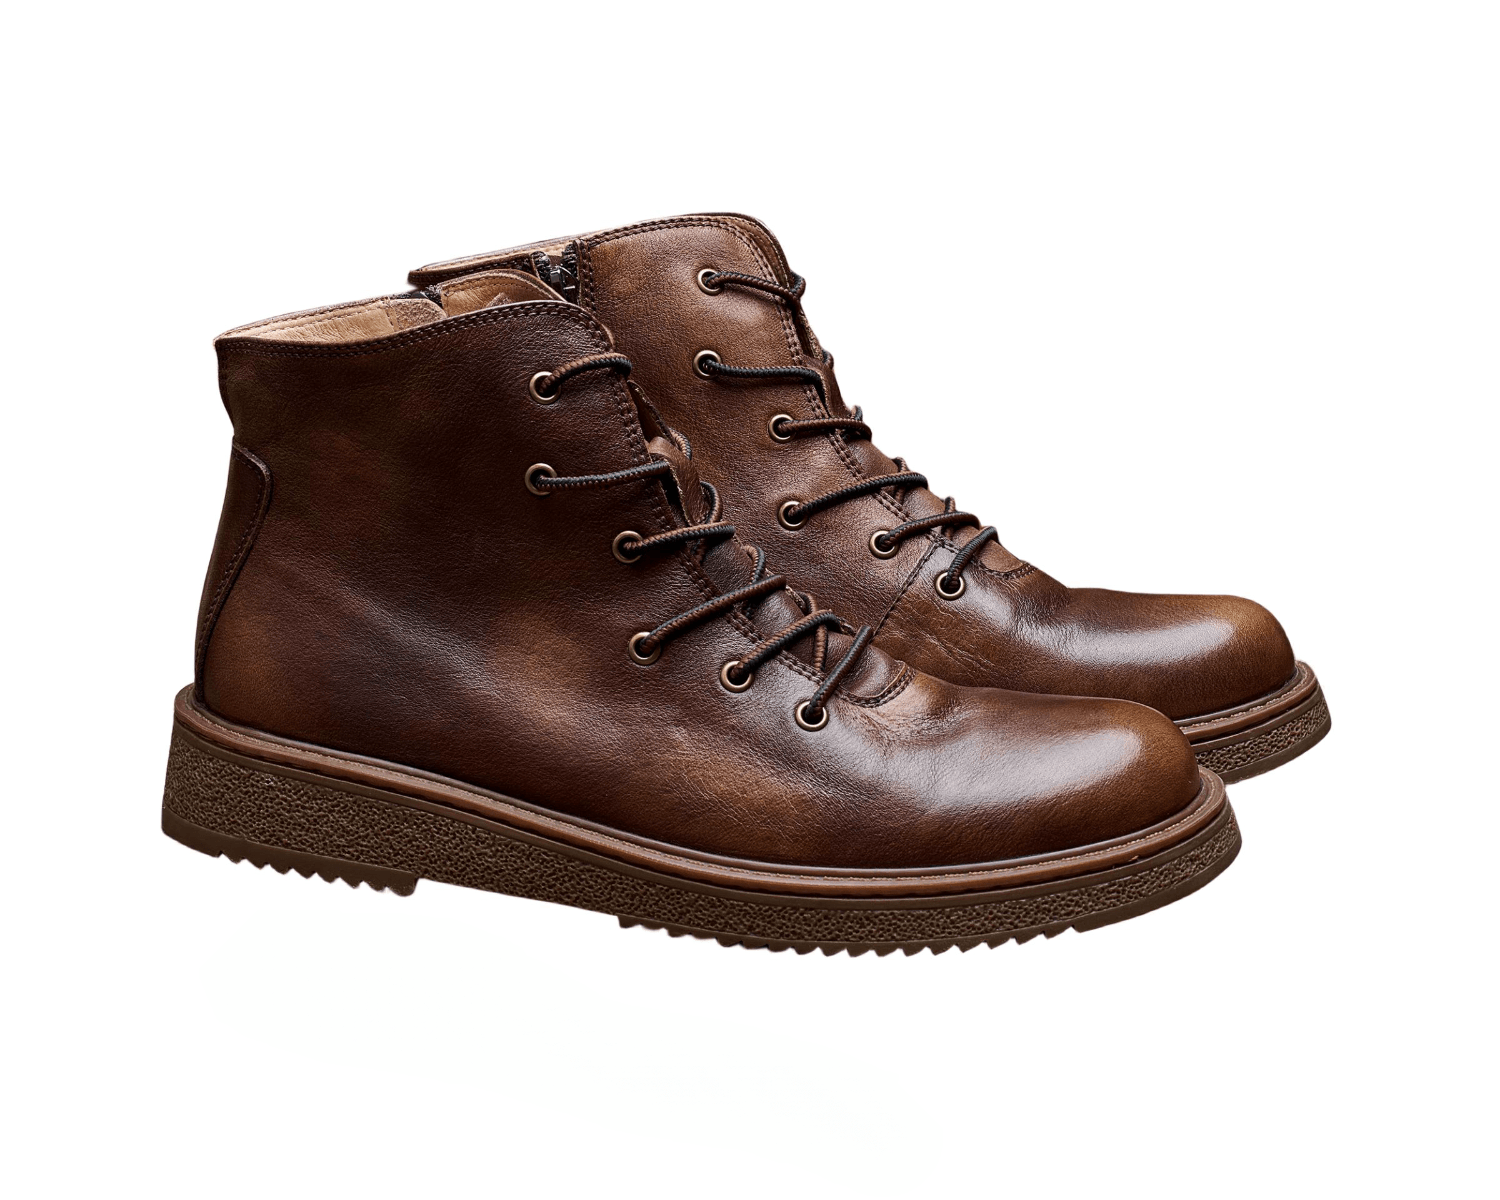 Men's elevated leather high-top retro Martin boots0